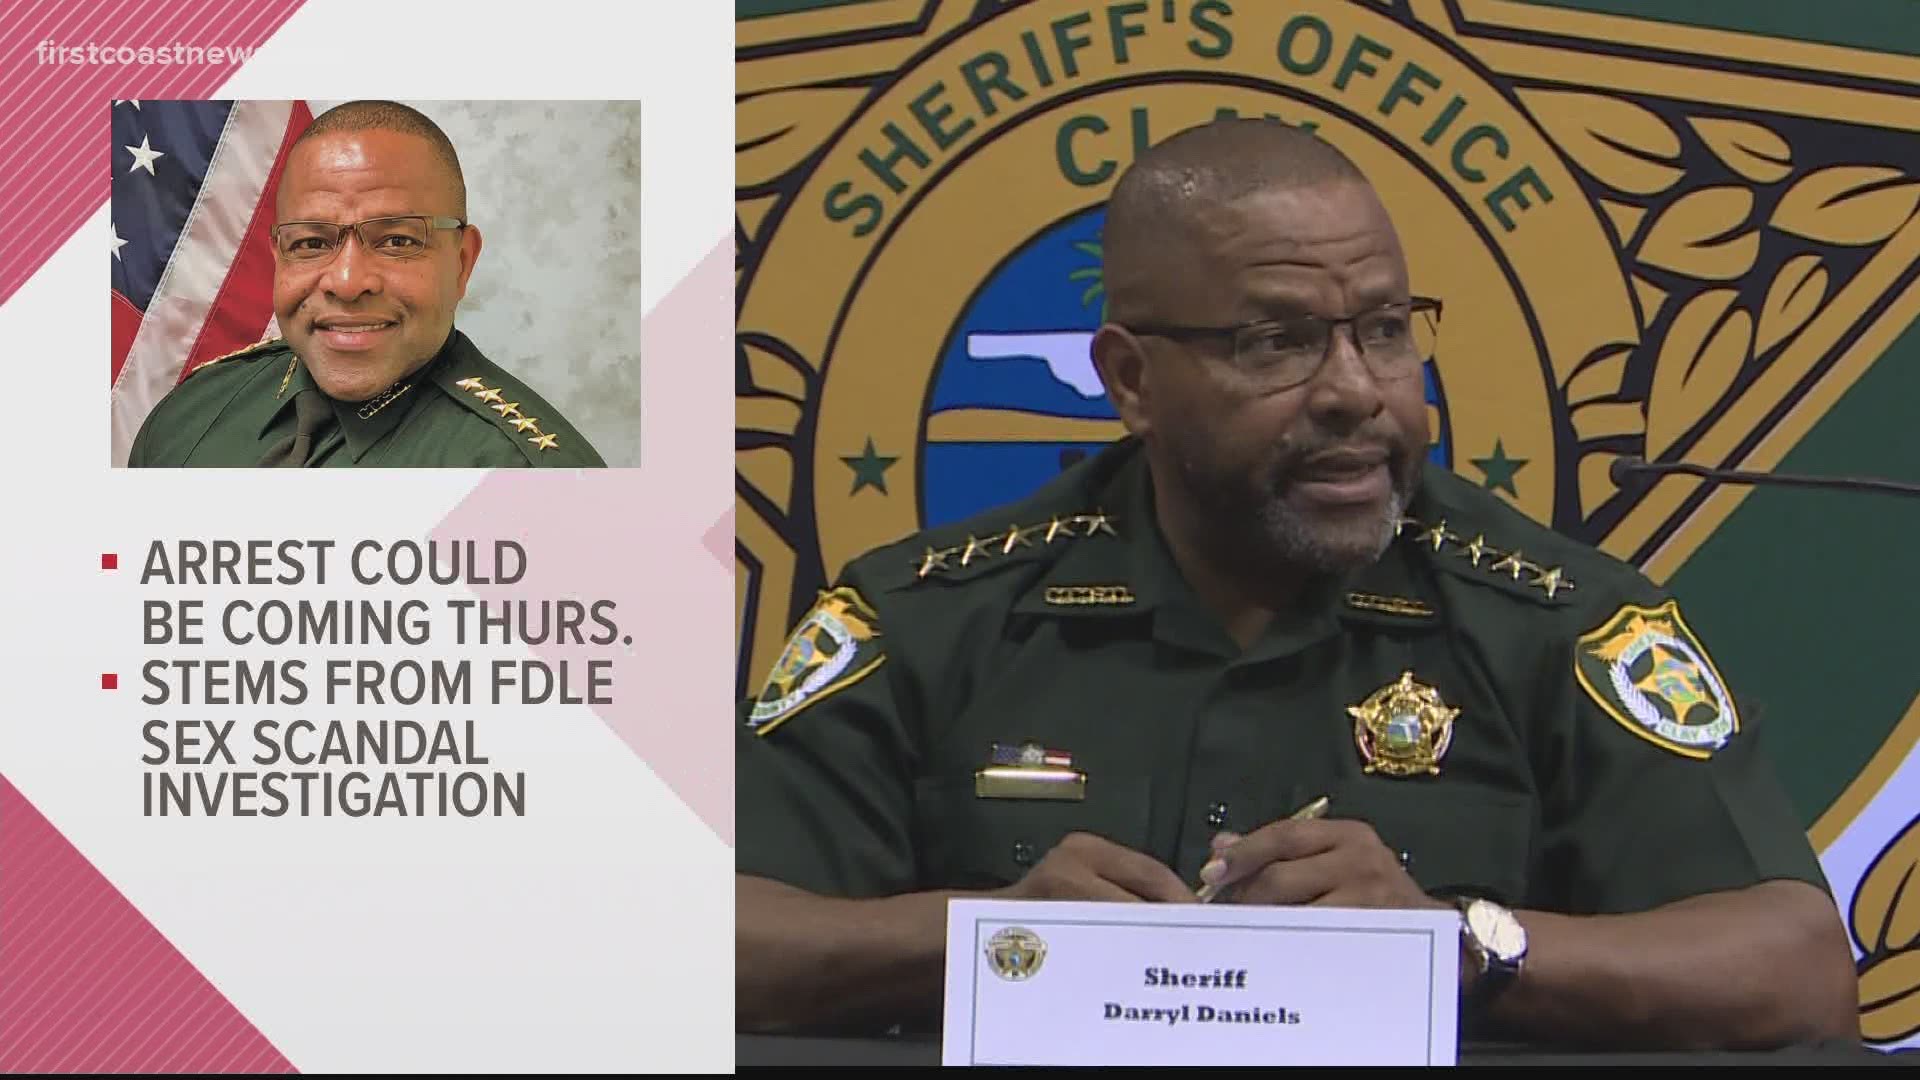 According to multiple law enforcement officials, including officers inside the CCSO, Sheriff Darryl Daniels could be arrested as soon as Thursday.